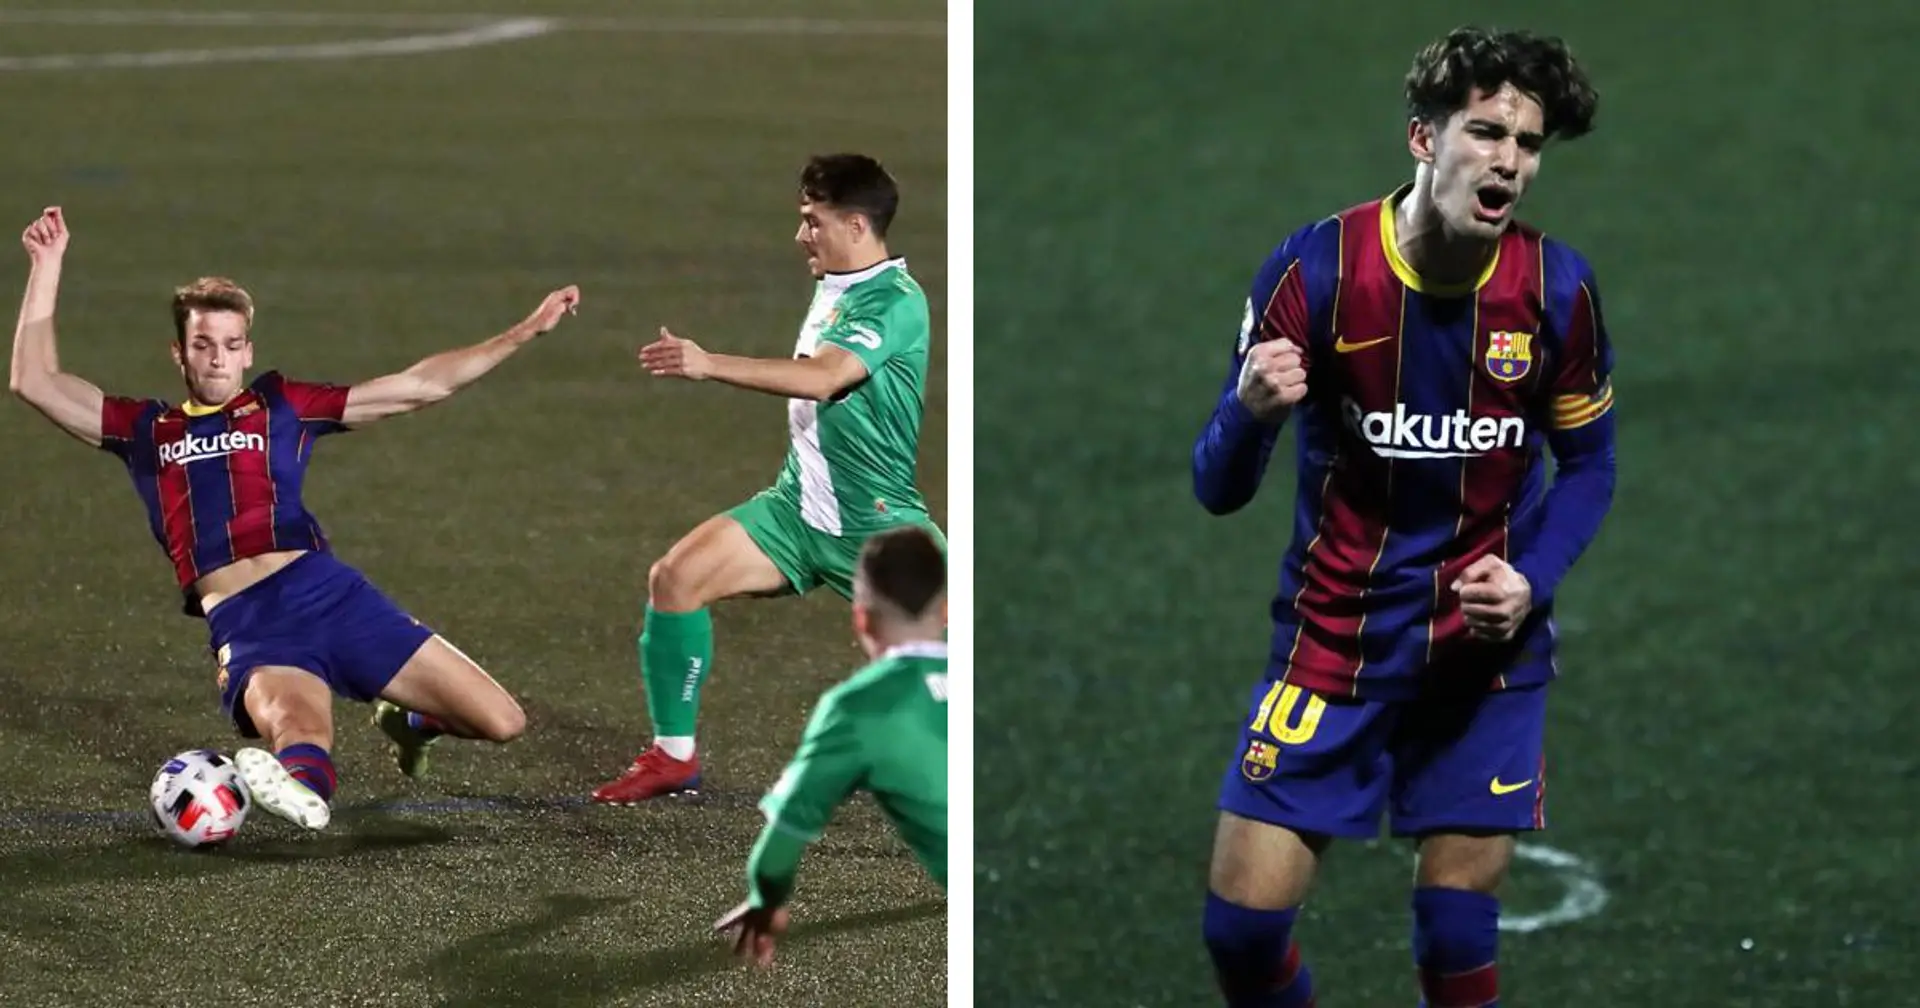 Barca B jump to 4th spot in the league as they beat Cornella in tough away clash (video)